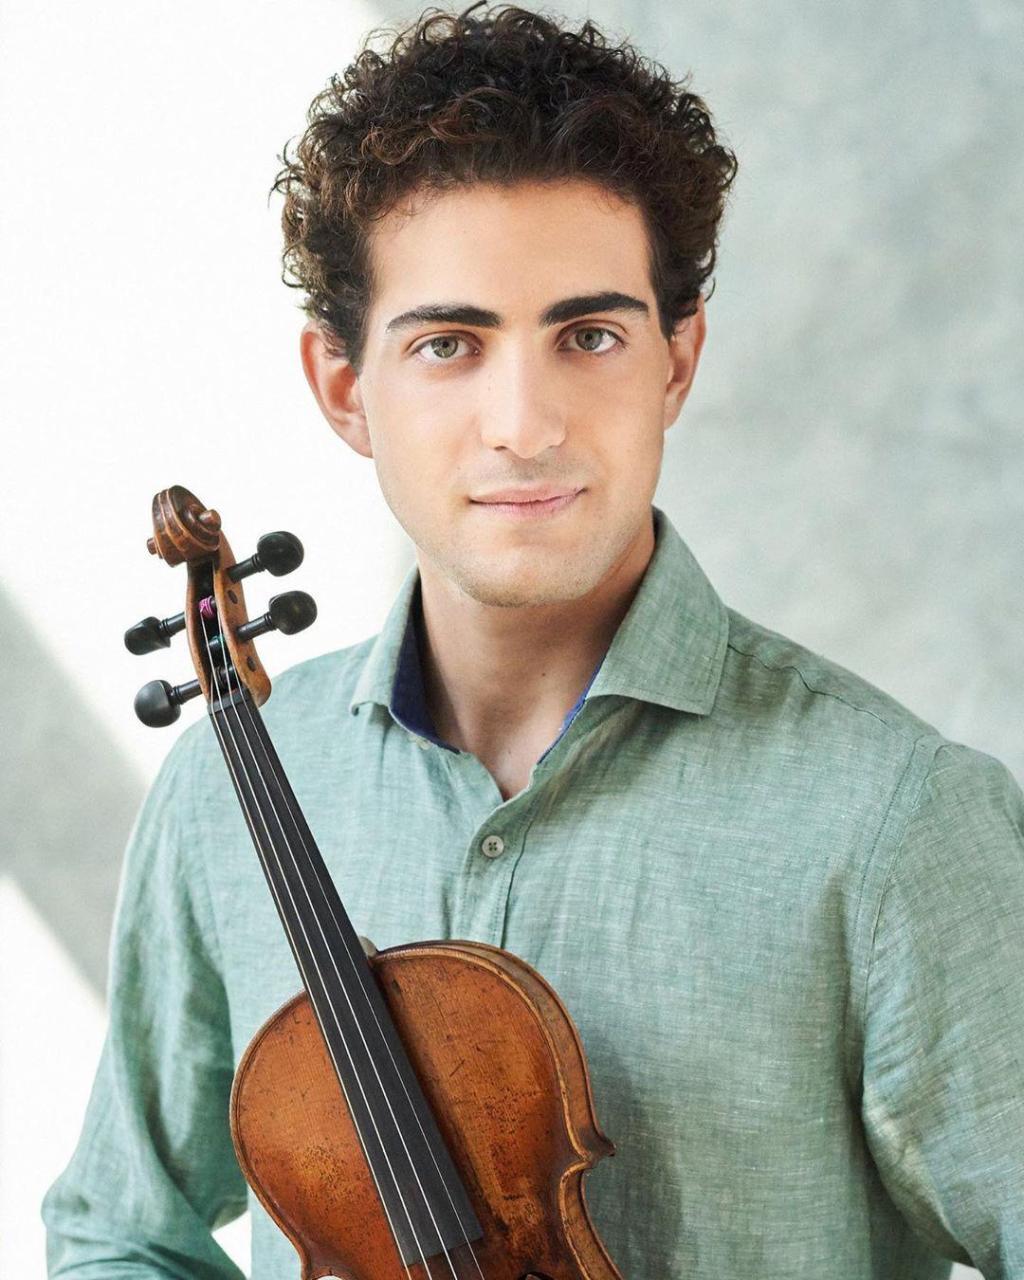 Young violinist to perform in St. Petersburg